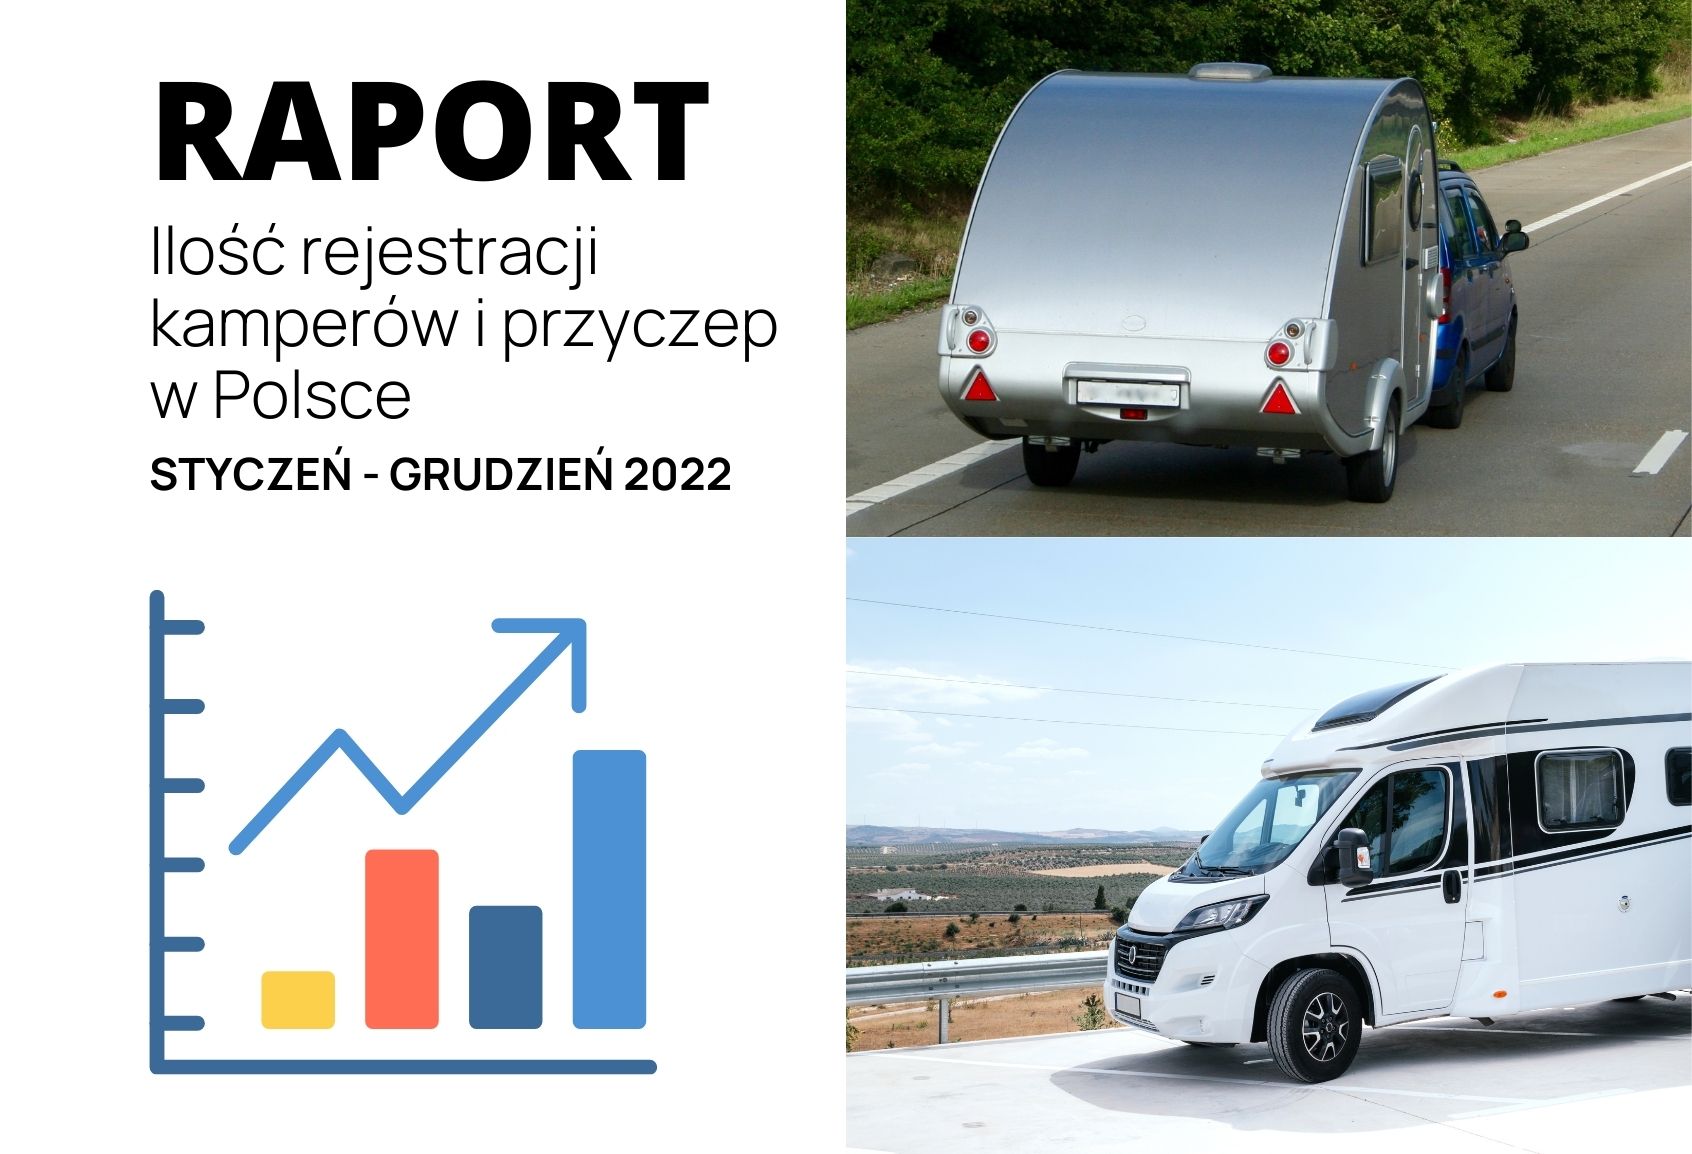 Sales statistics of new and used motorhomes and caravans in 2022 in Poland – main image